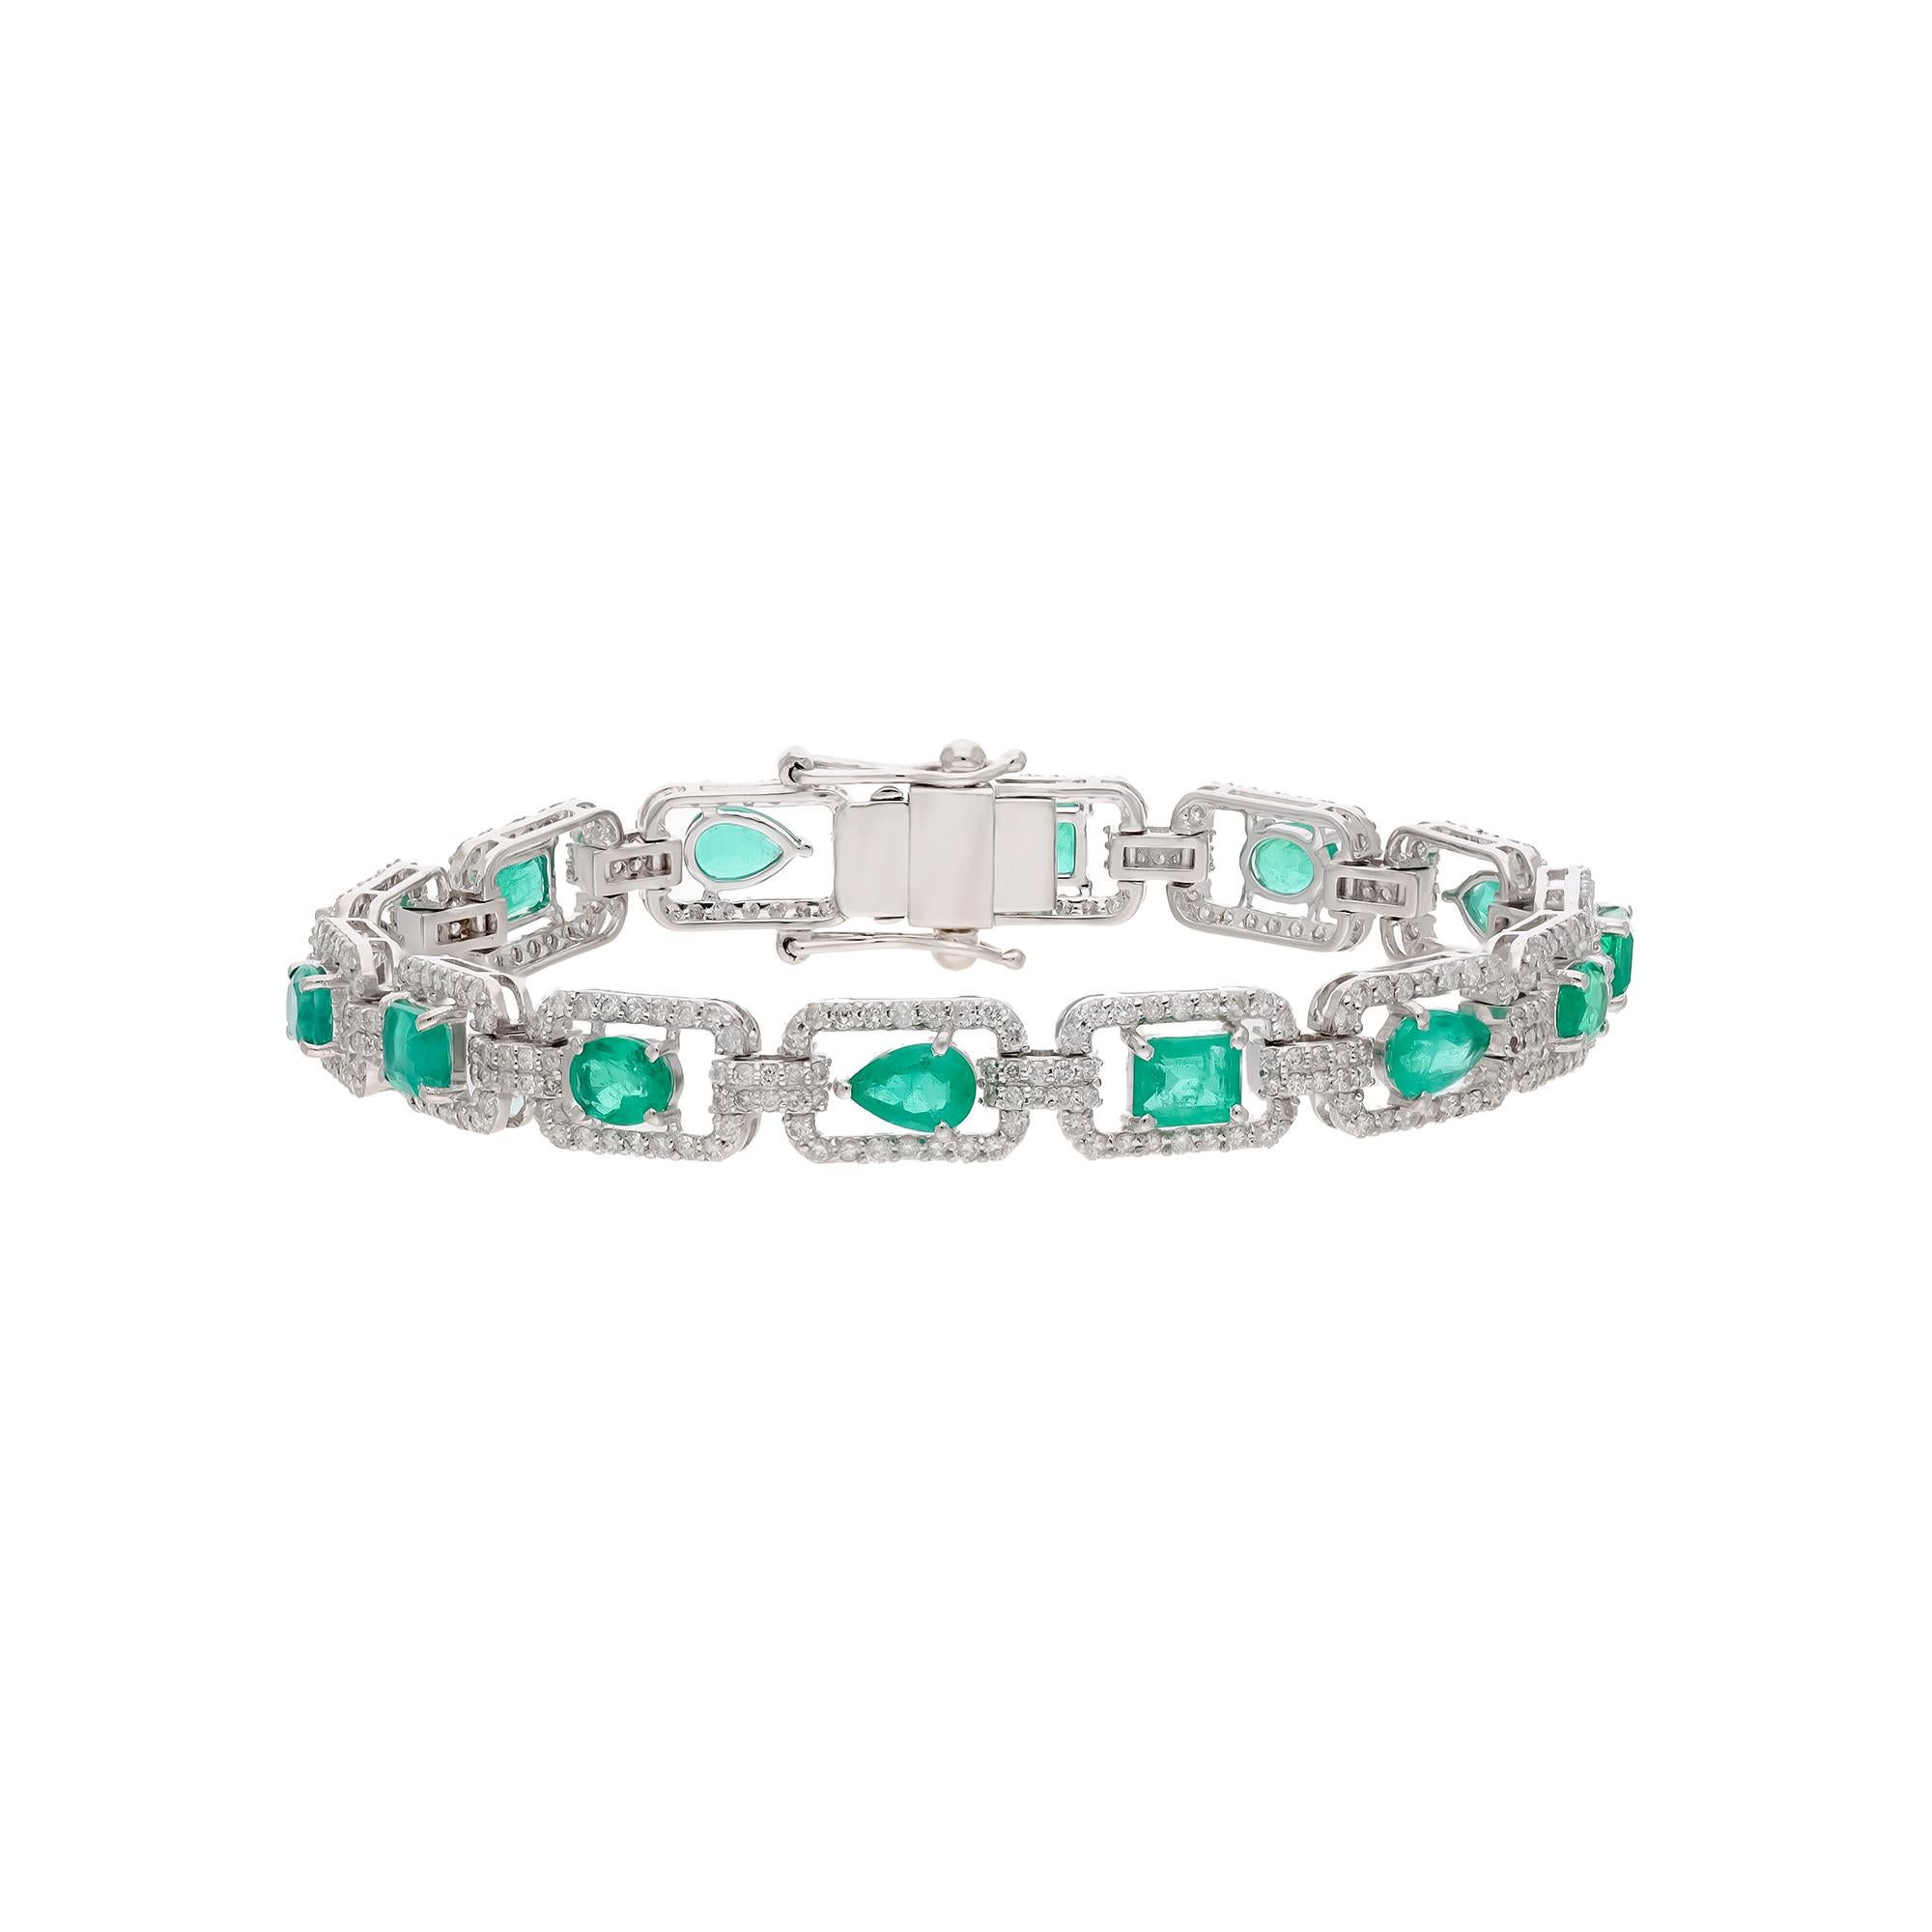 This is a natural Zambian Emerald bracelet with diamonds and 18k gold. The emeralds are very high quality and very good quality diamonds the clarity is vsi and G colour


Emeralds : 5.80 carats
diamonds : 2.75 carats
gold : 14.960 gm

This is a